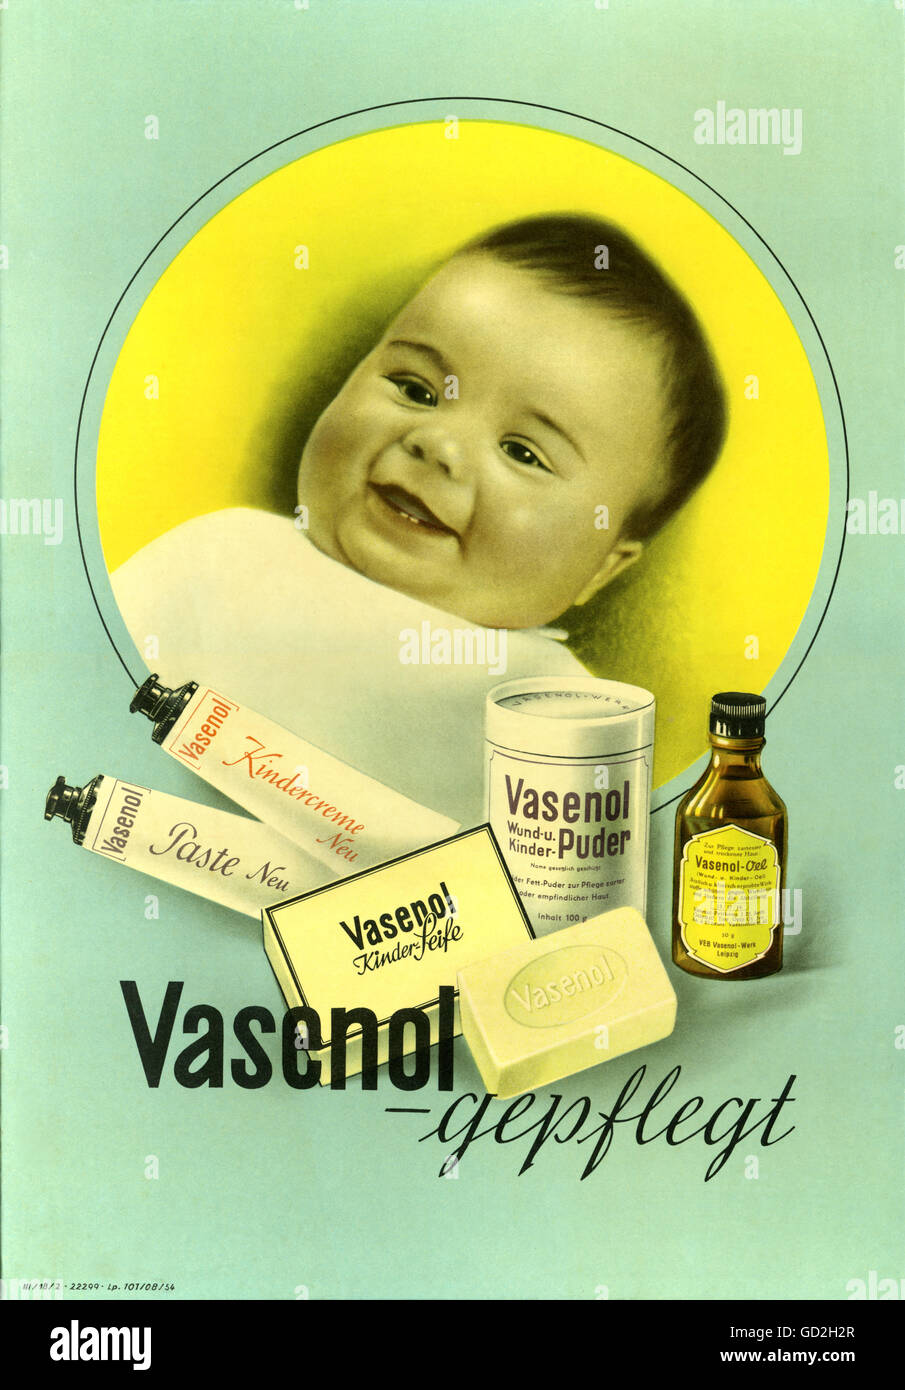 advertising, body care, Vasenol, products for babies and infants, care edition, made by: VEB Vasenol-Werk Leipzig, promotional sign, advertising slogan 'Vasenol-gepflegt', Leipzig, Germany, East-Germany, 1954, Additional-Rights-Clearences-Not Available Stock Photo